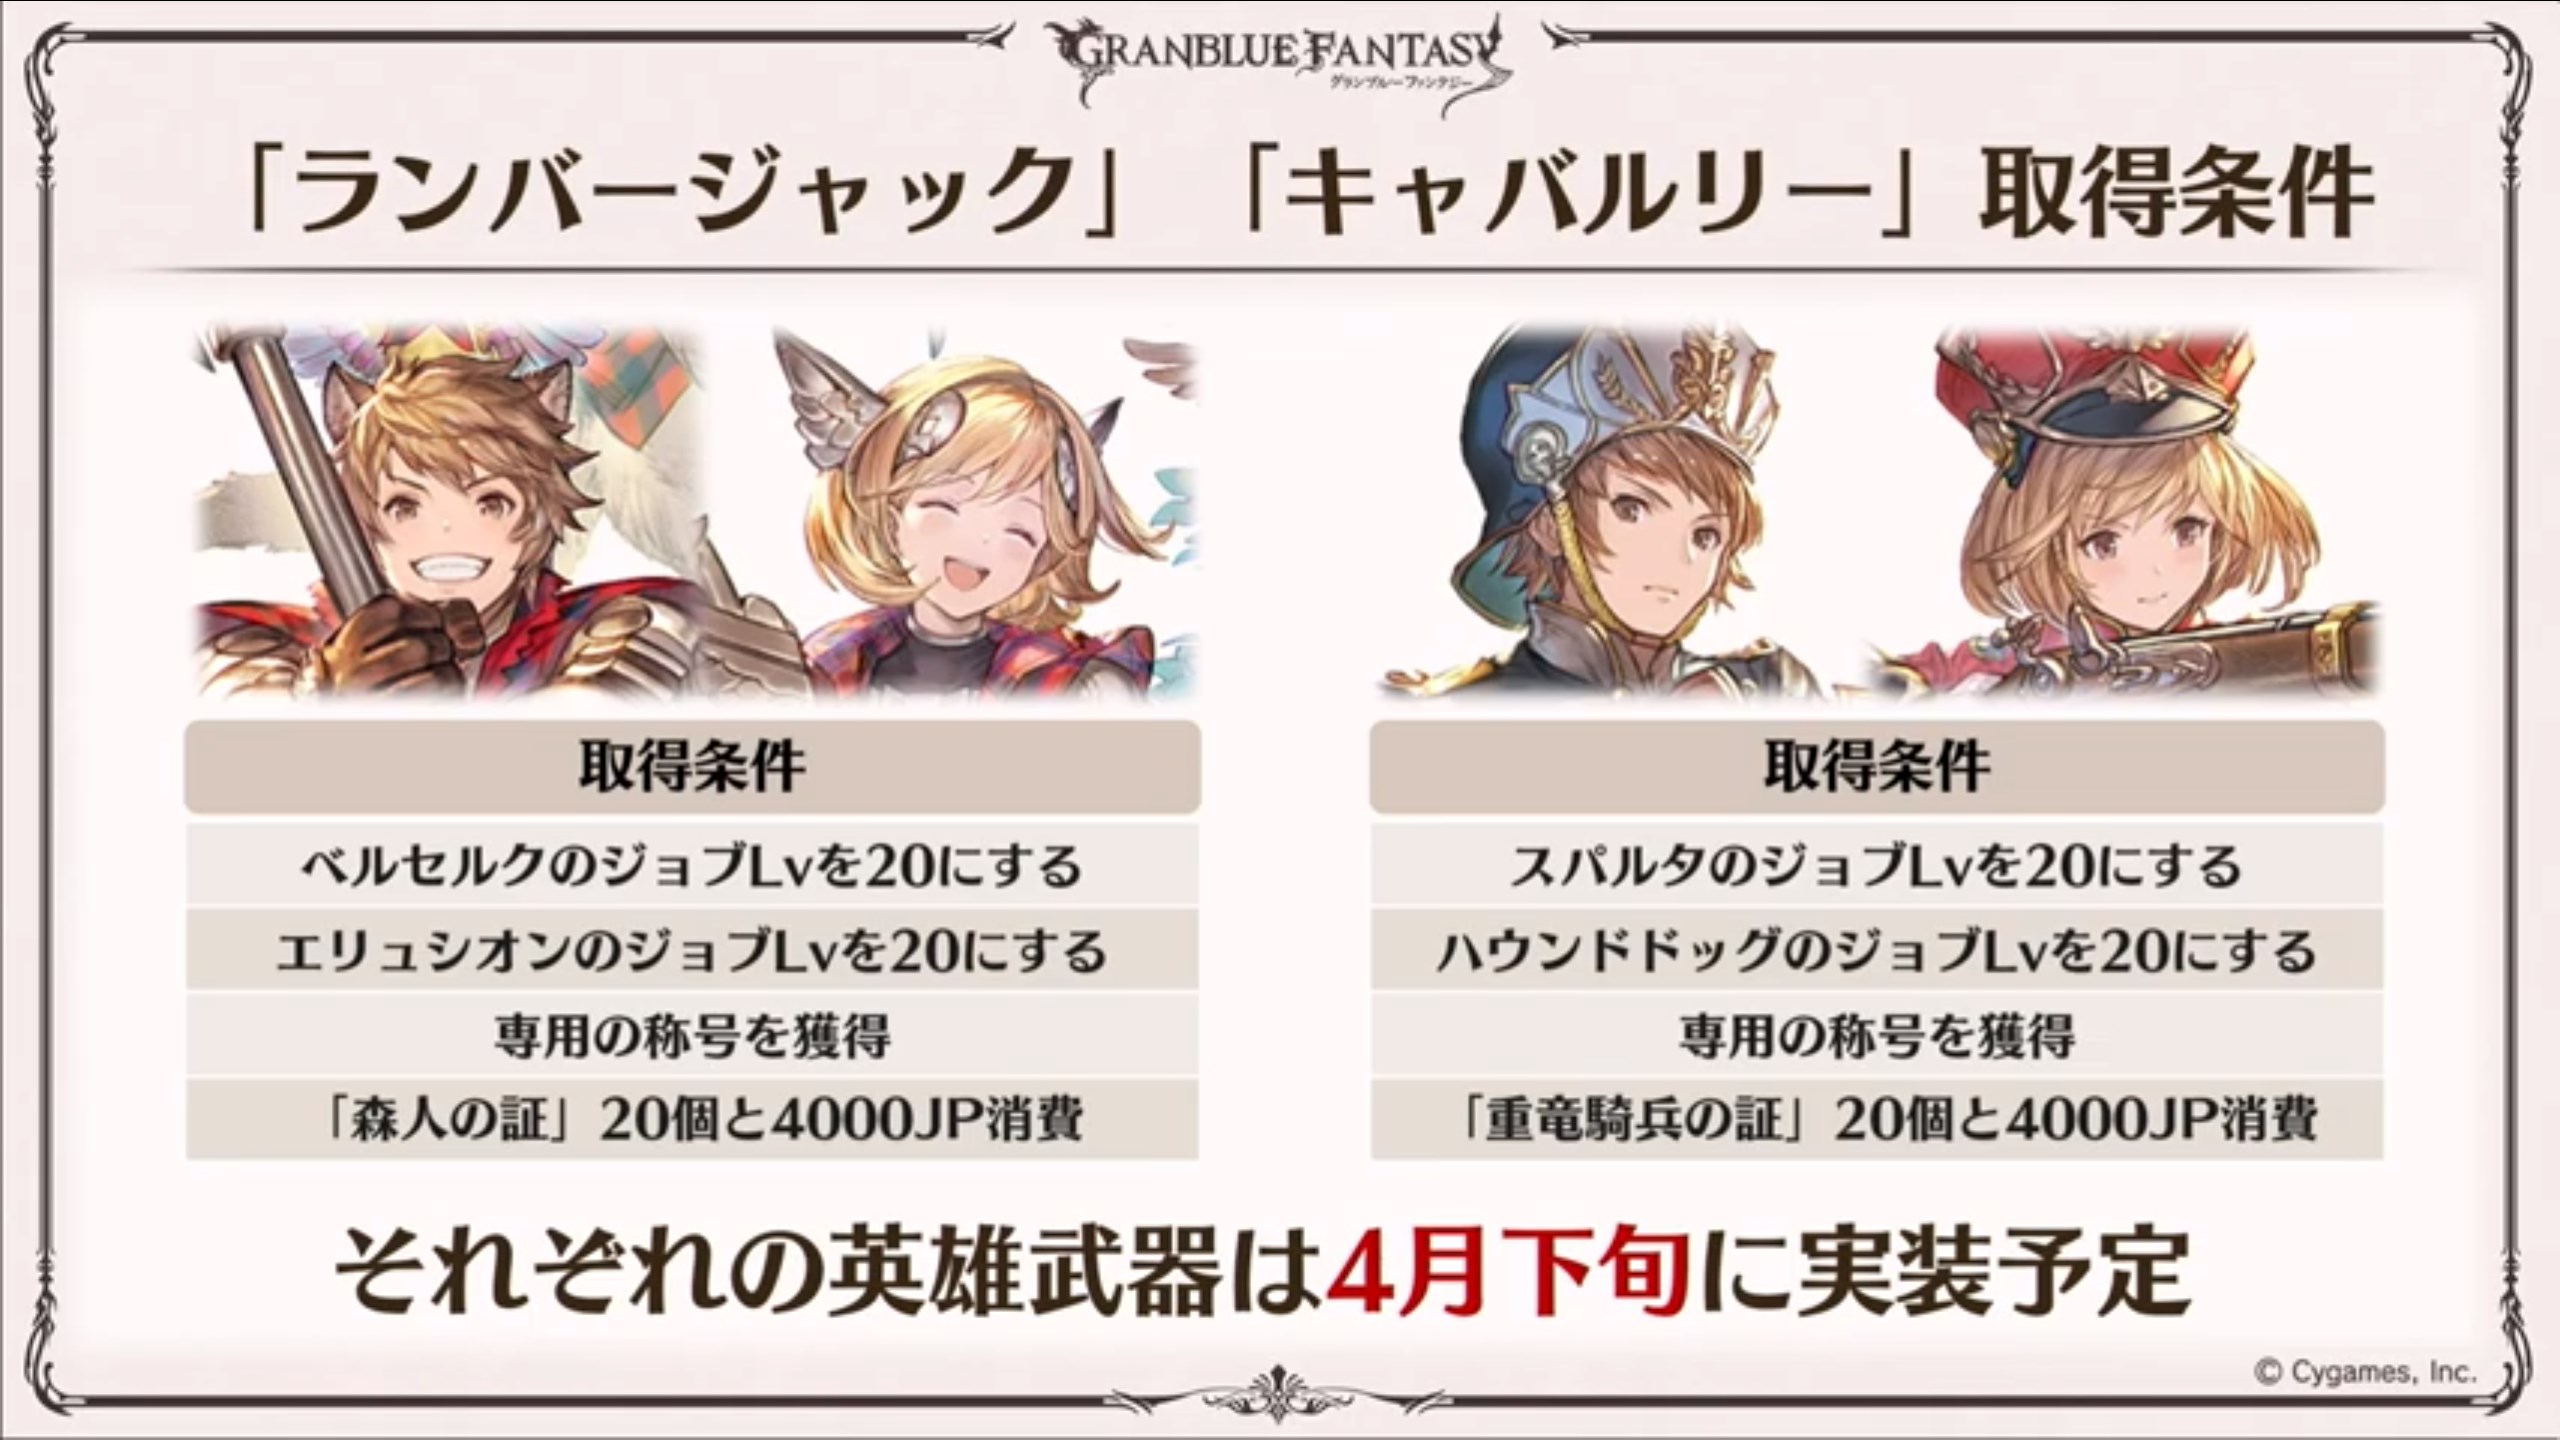 Granblue En Unofficial Kaguya And Grand Order Summon 4 S Gives Them Sub Auras Plus Other Stuff We Ll Get To Later Grand Order 5 Additional Damage To Non Elemental Foes Kaguya 10